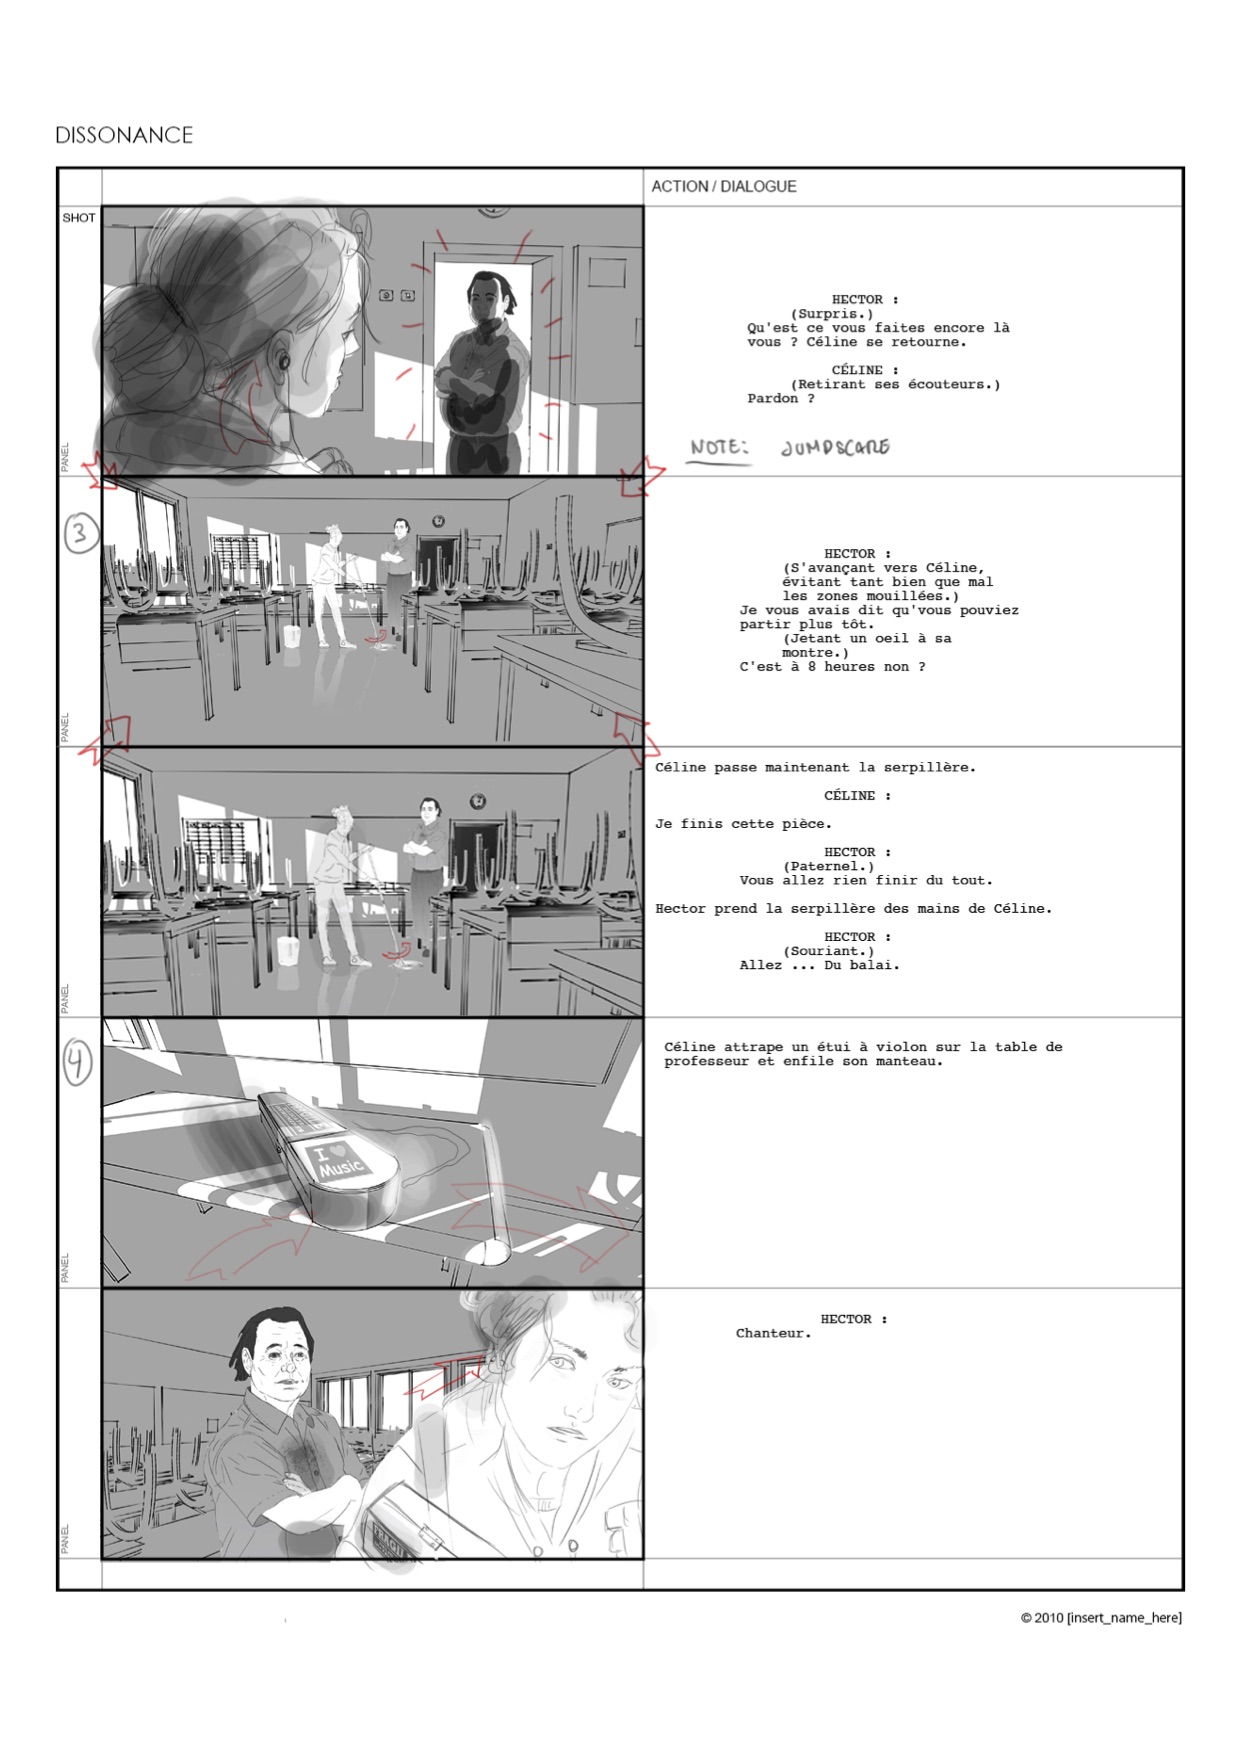 comment faire un storyboard storyboards projet de film story-bord story-bords